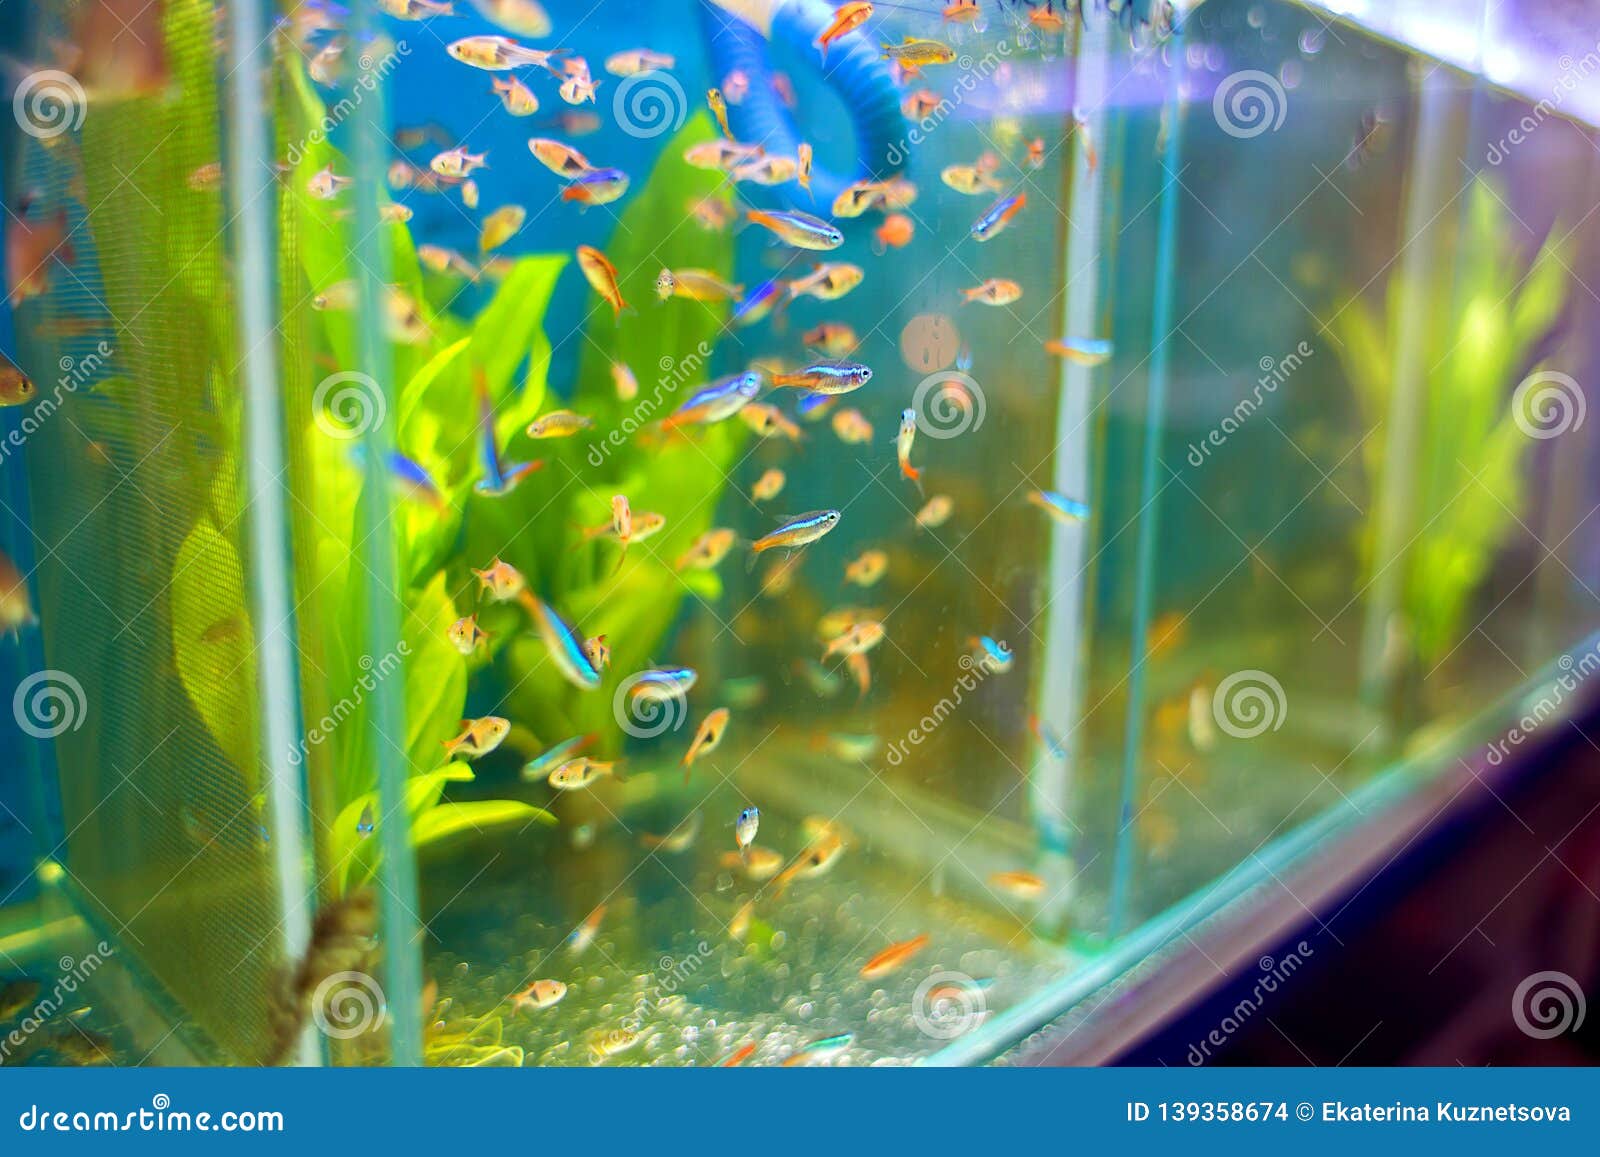 Sale Of Aquarian Small Fishes In Pet Shop A Big Show Window With